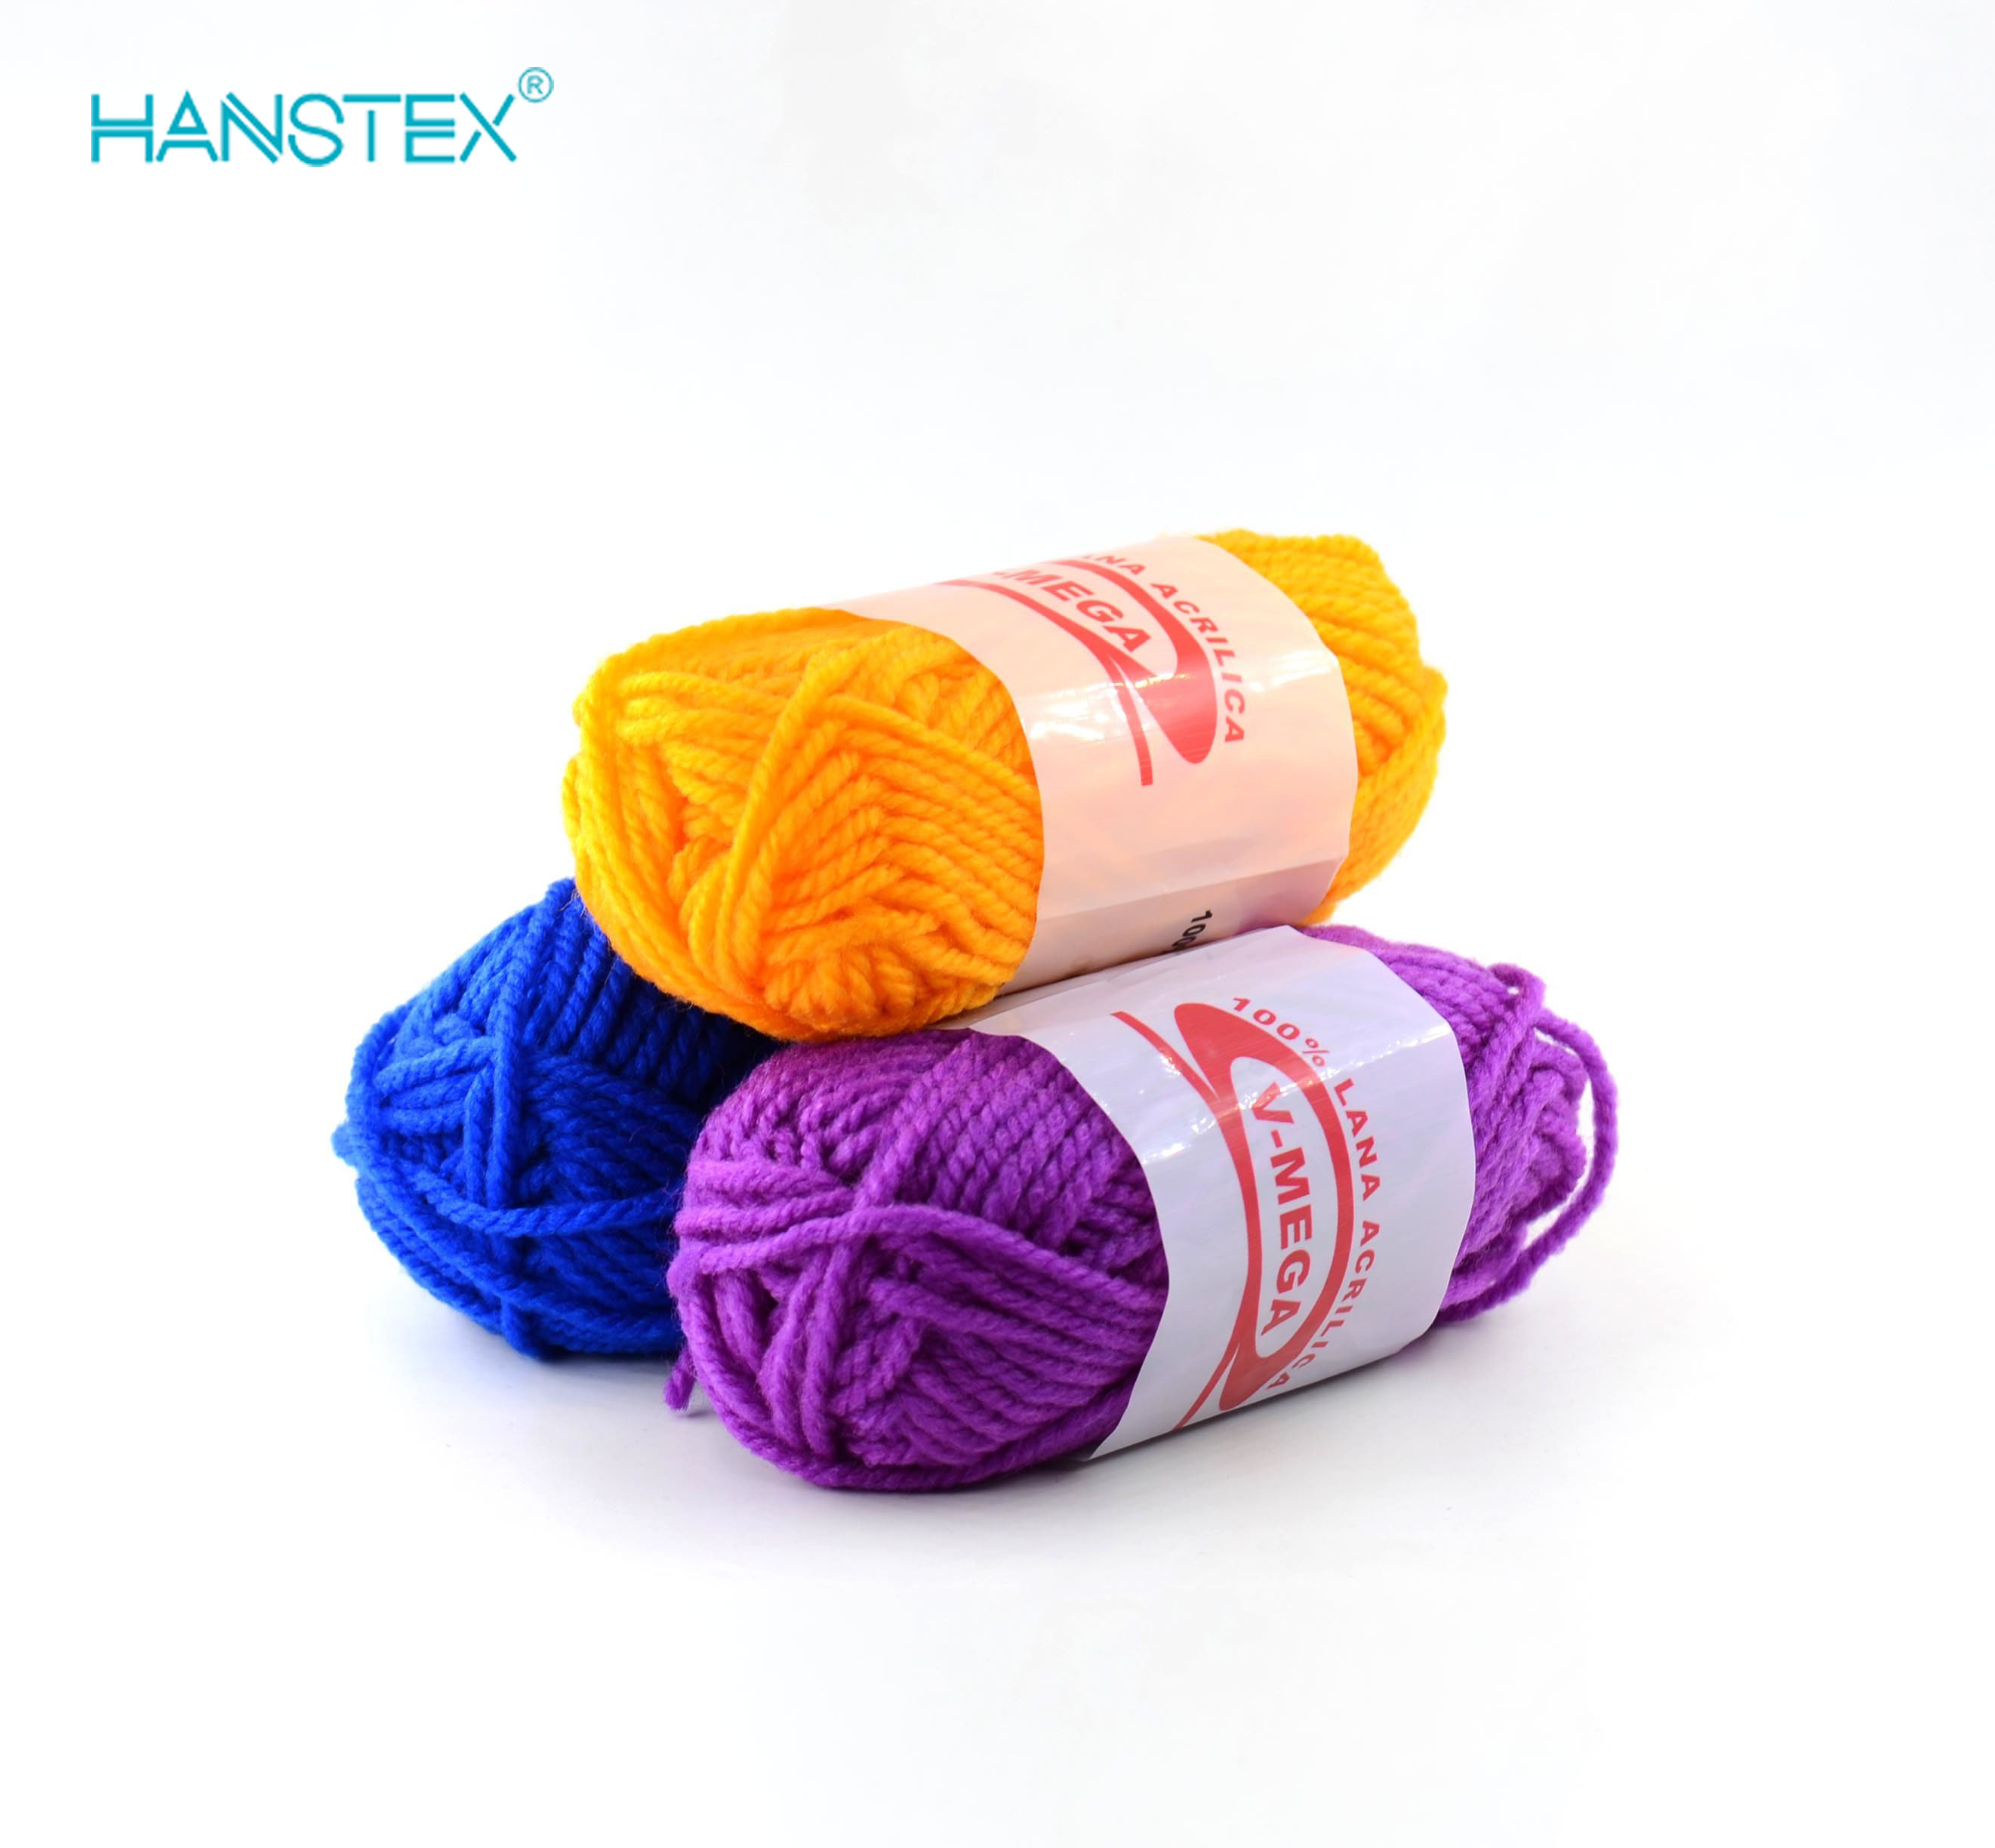 Craft-Vogue-Fully-Stocked-Fashionable-Best-Sell-Amazon-Free-Samples-Crochet-Yarn-for-Hand-Knitting-Yarn-Soft-Worsted-100-Acrylic-Yarn